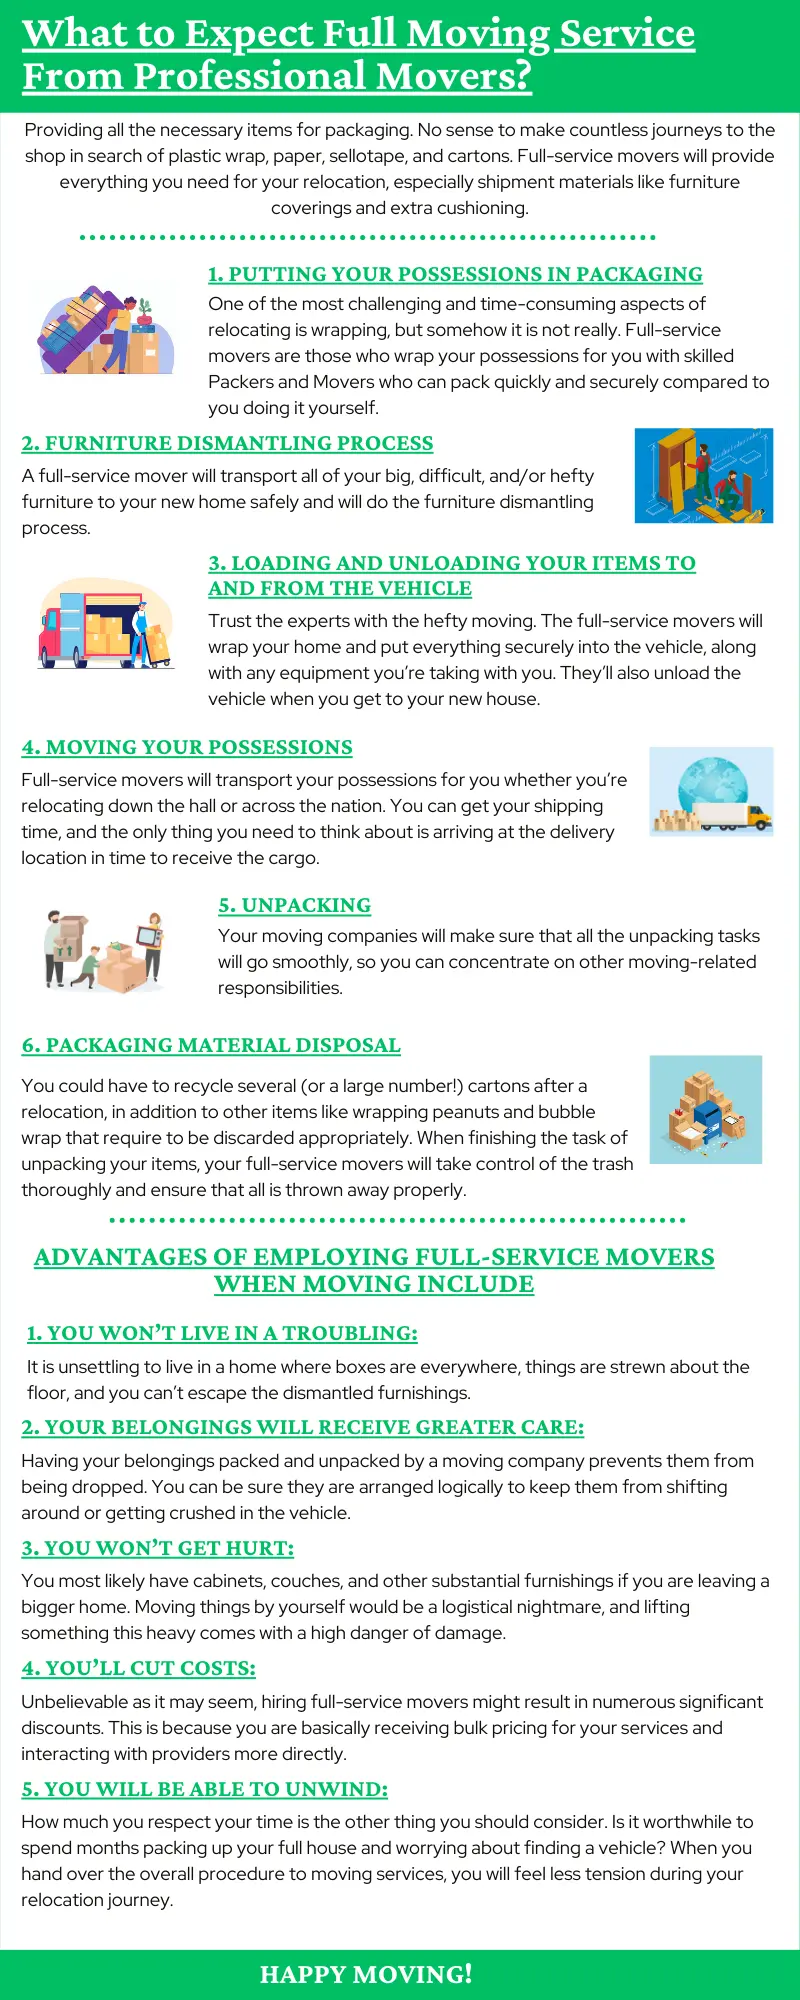 What to Expect Full Moving Service From Professional Movers Informational Infographic